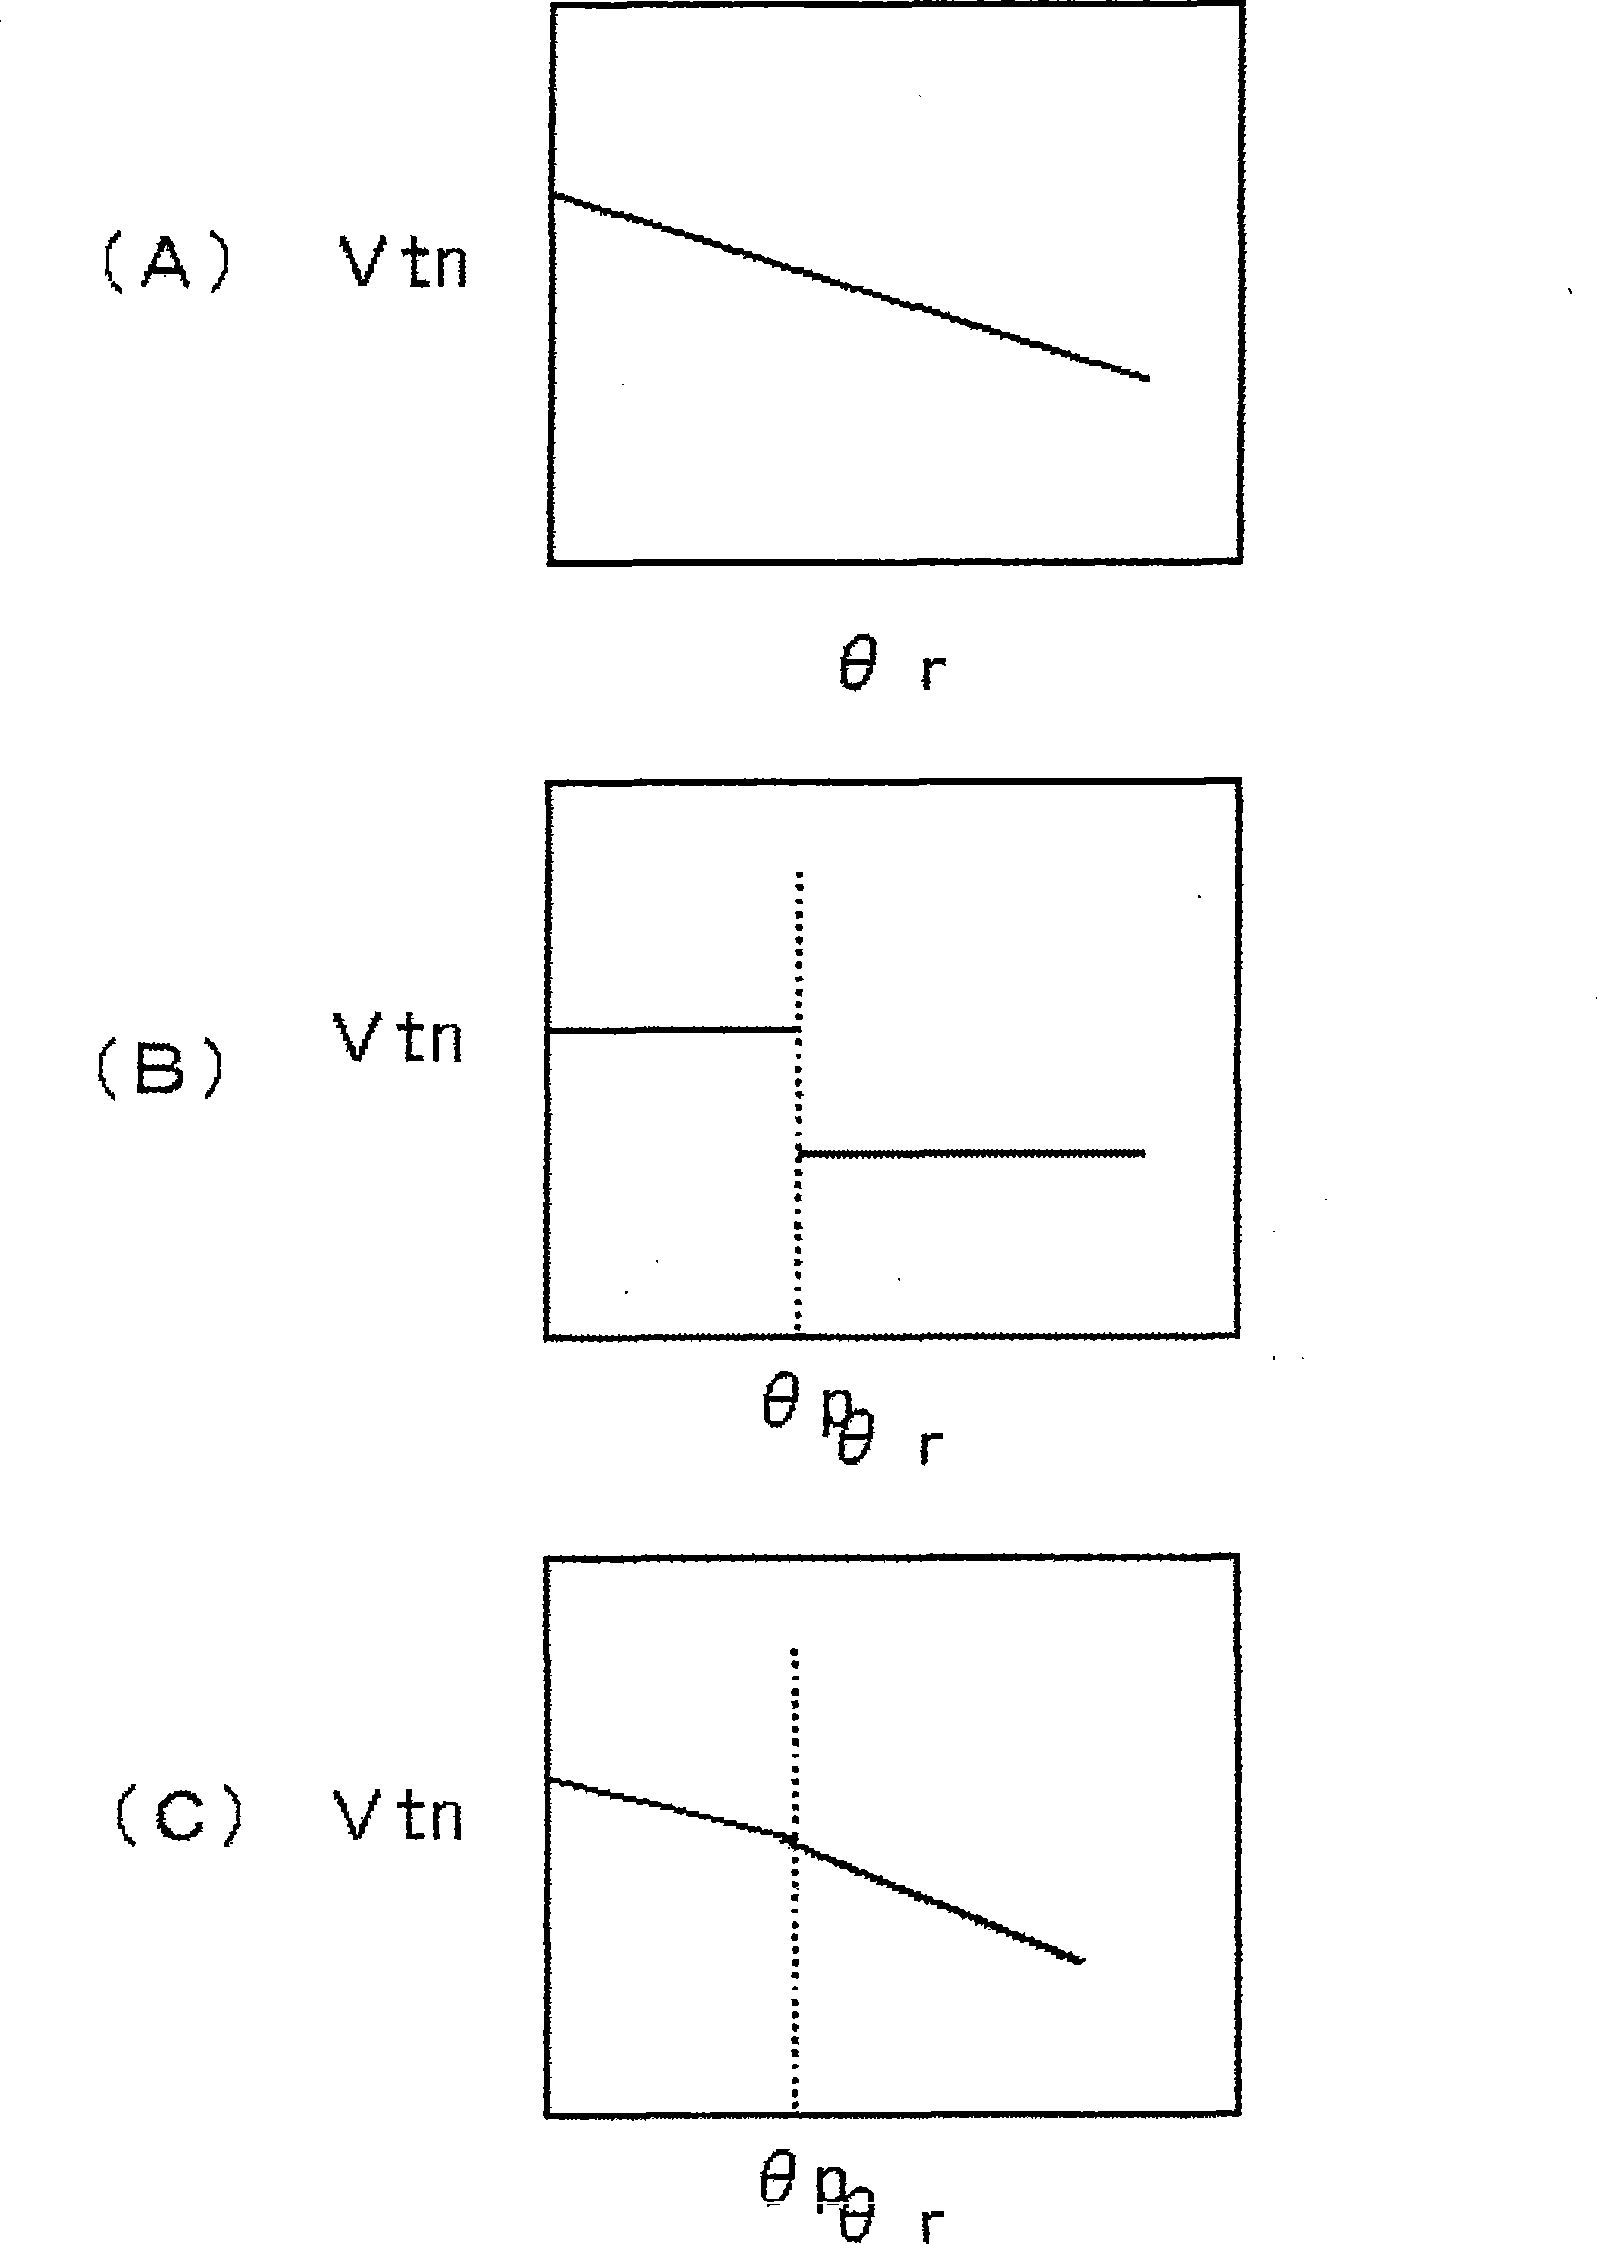 Neckdown detection control method for arc welding of consumable electrode